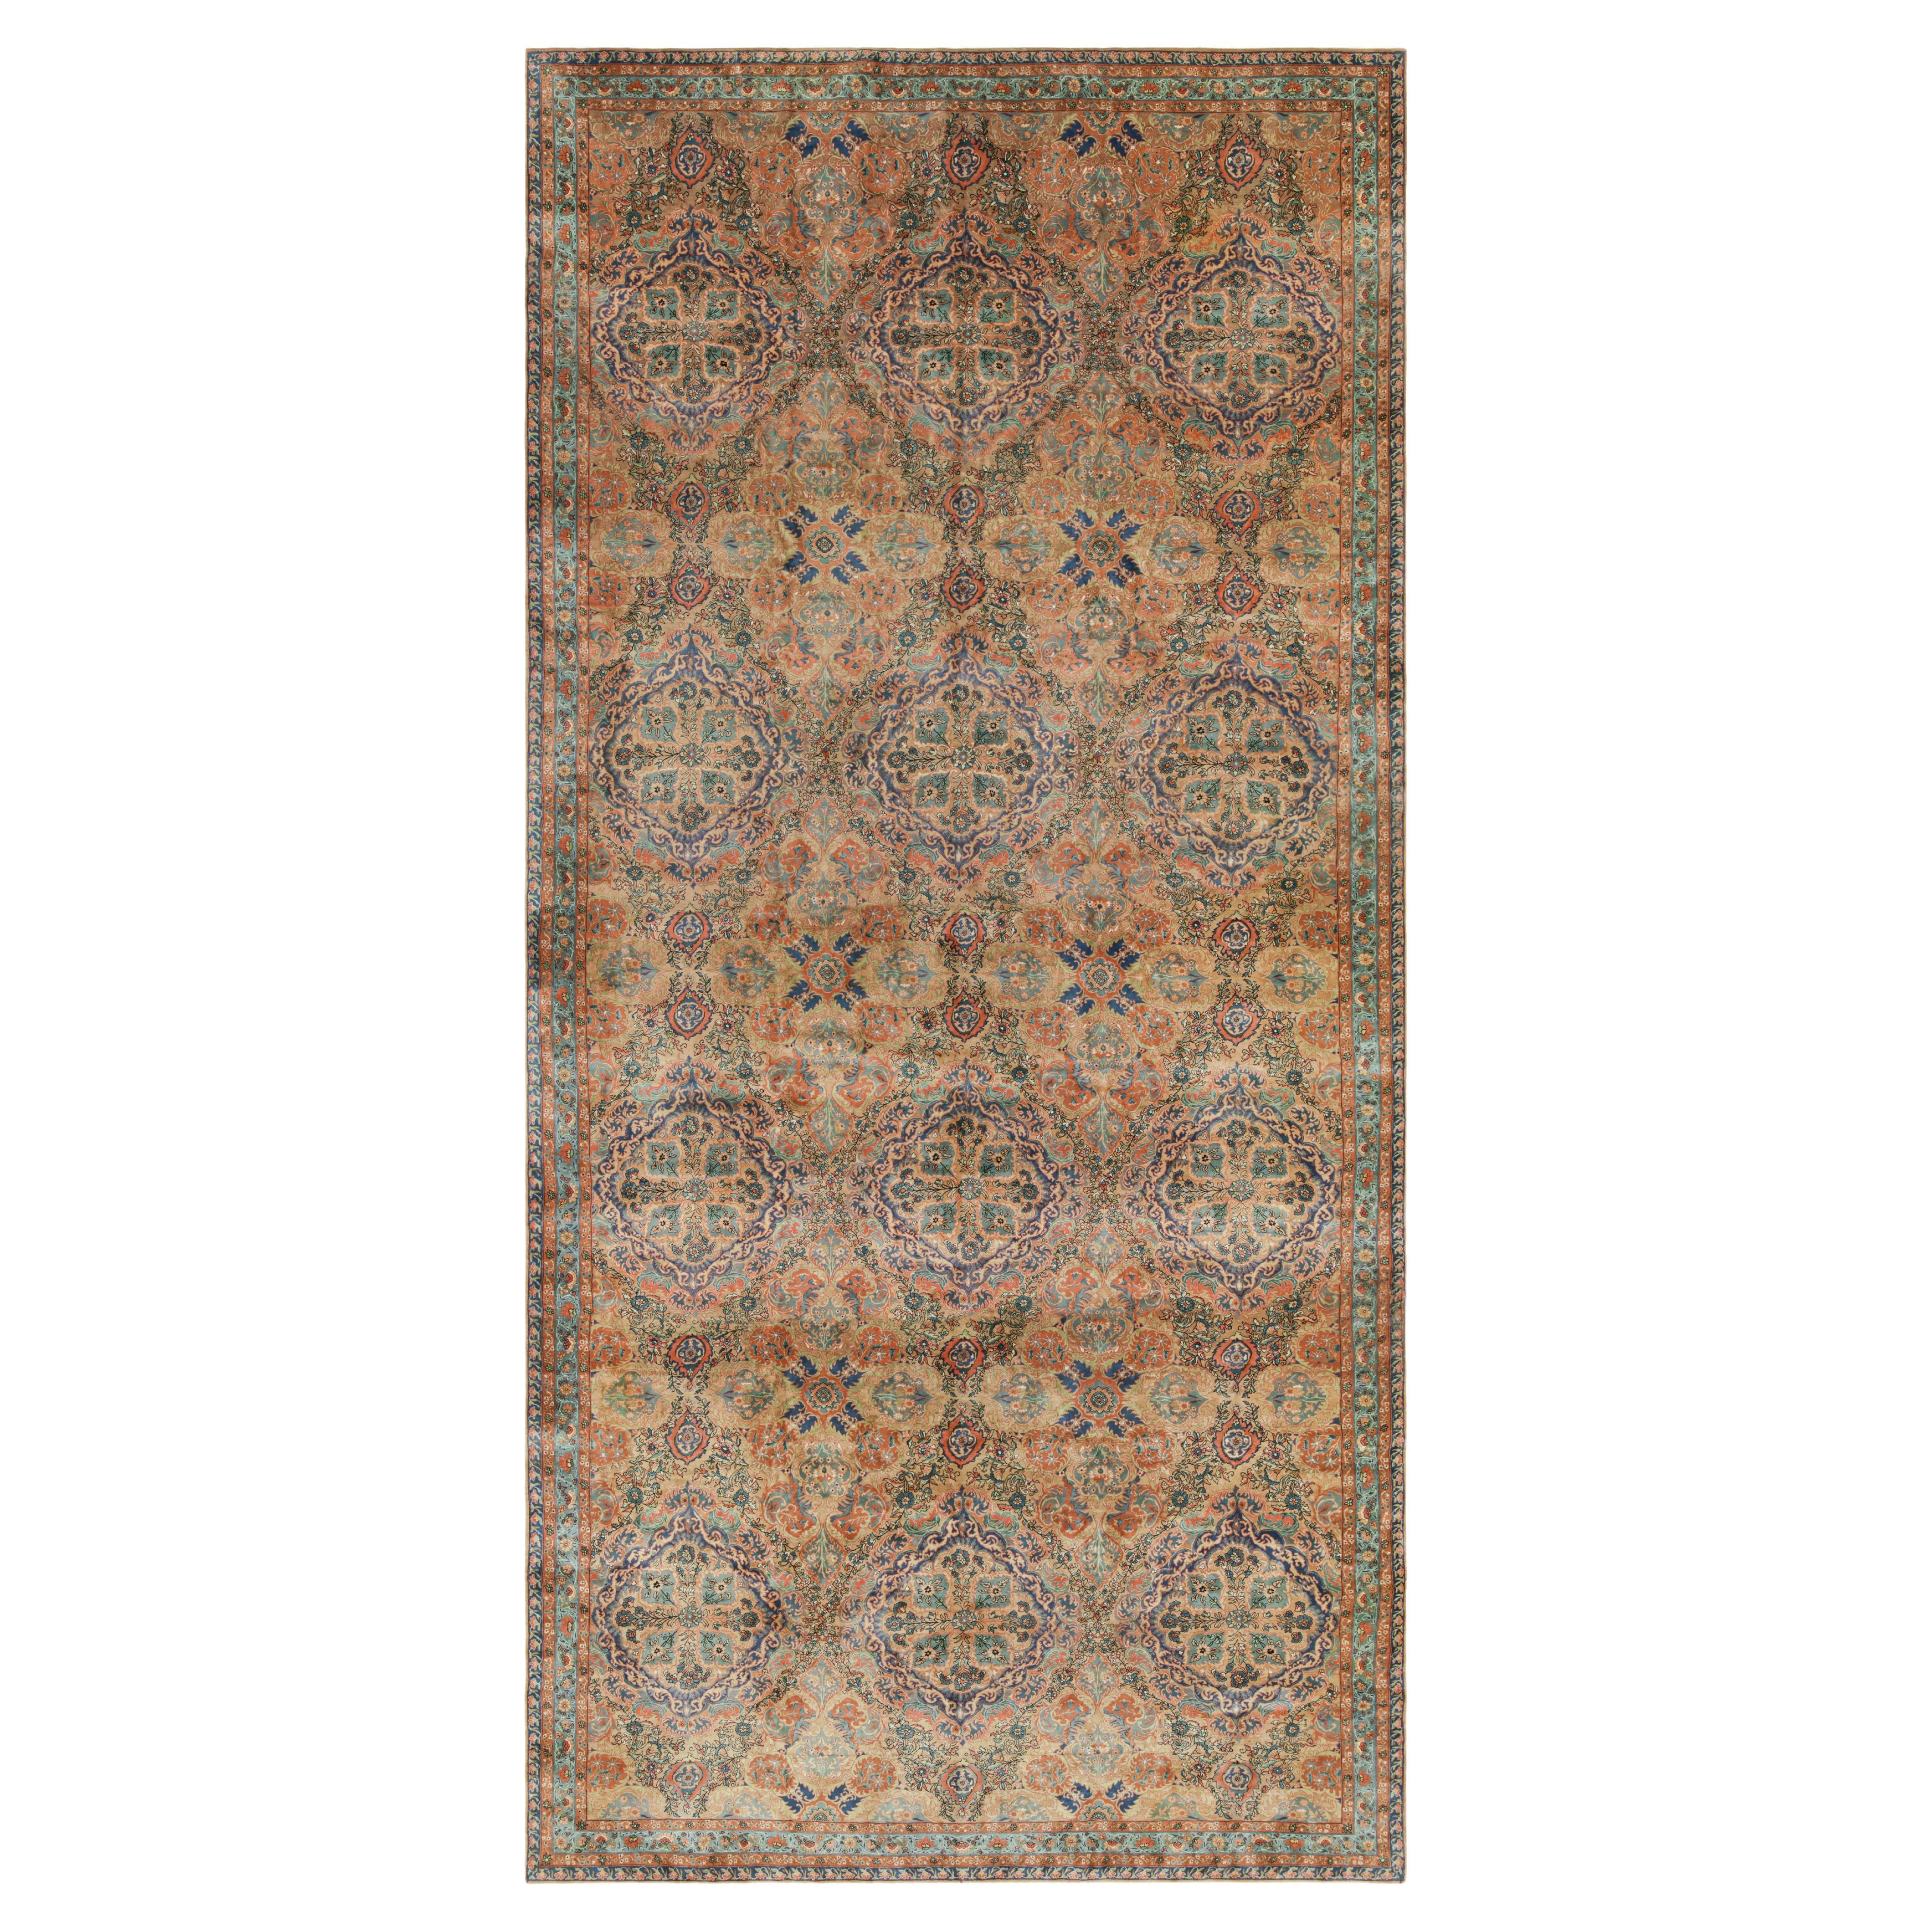 Antique Kerman Persian Style Palace Rug with Floral Patterns For Sale